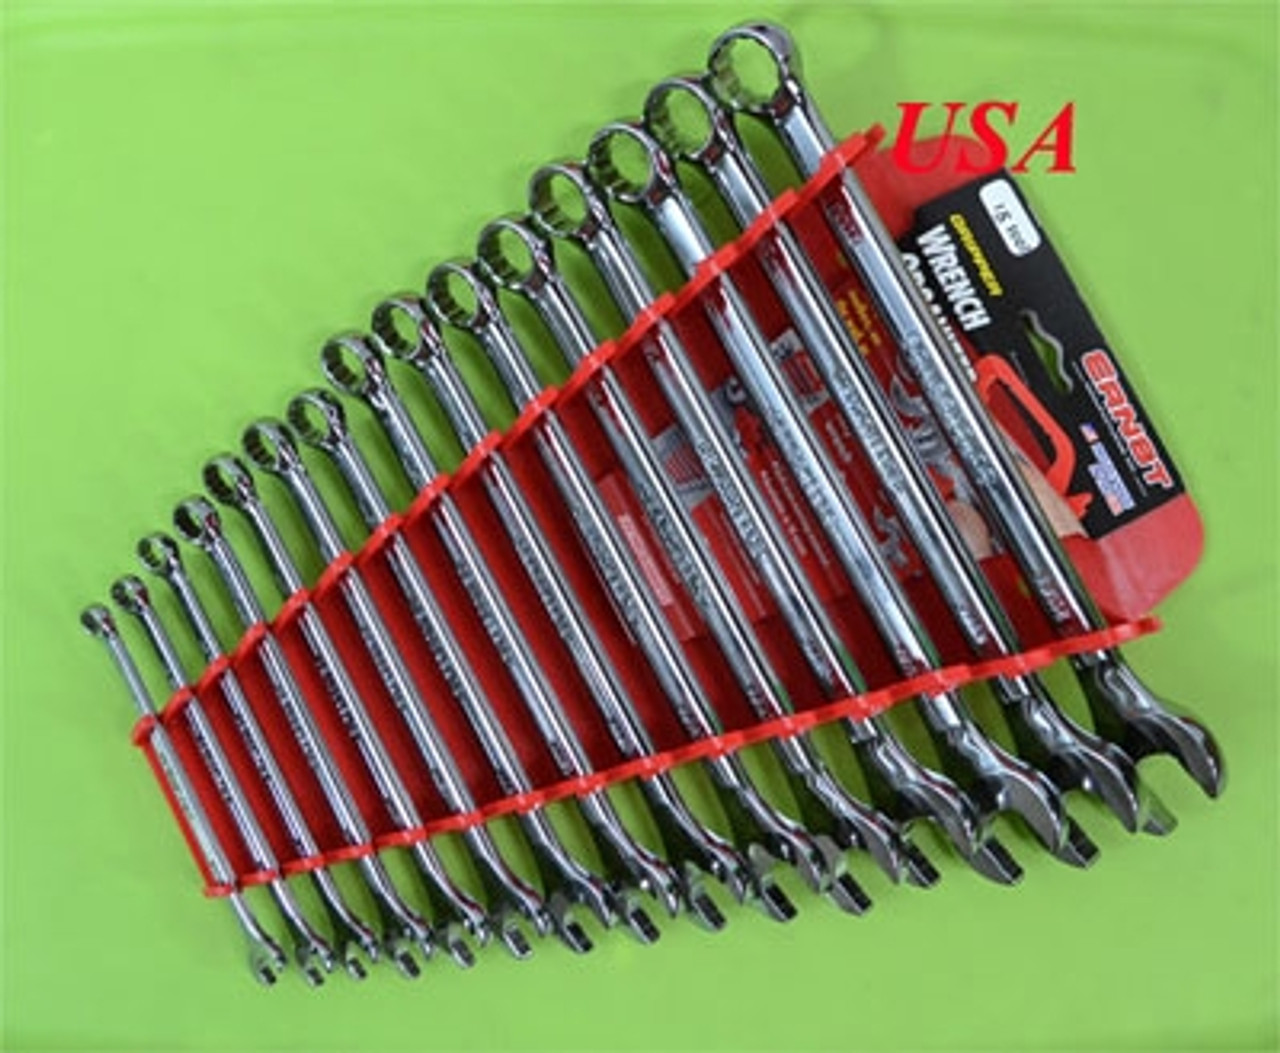 Ernst Manufacturing Gripper Wrench Organizer - Holds 15 Wrenches 5088 - ML  Tools & Equipment,LLC